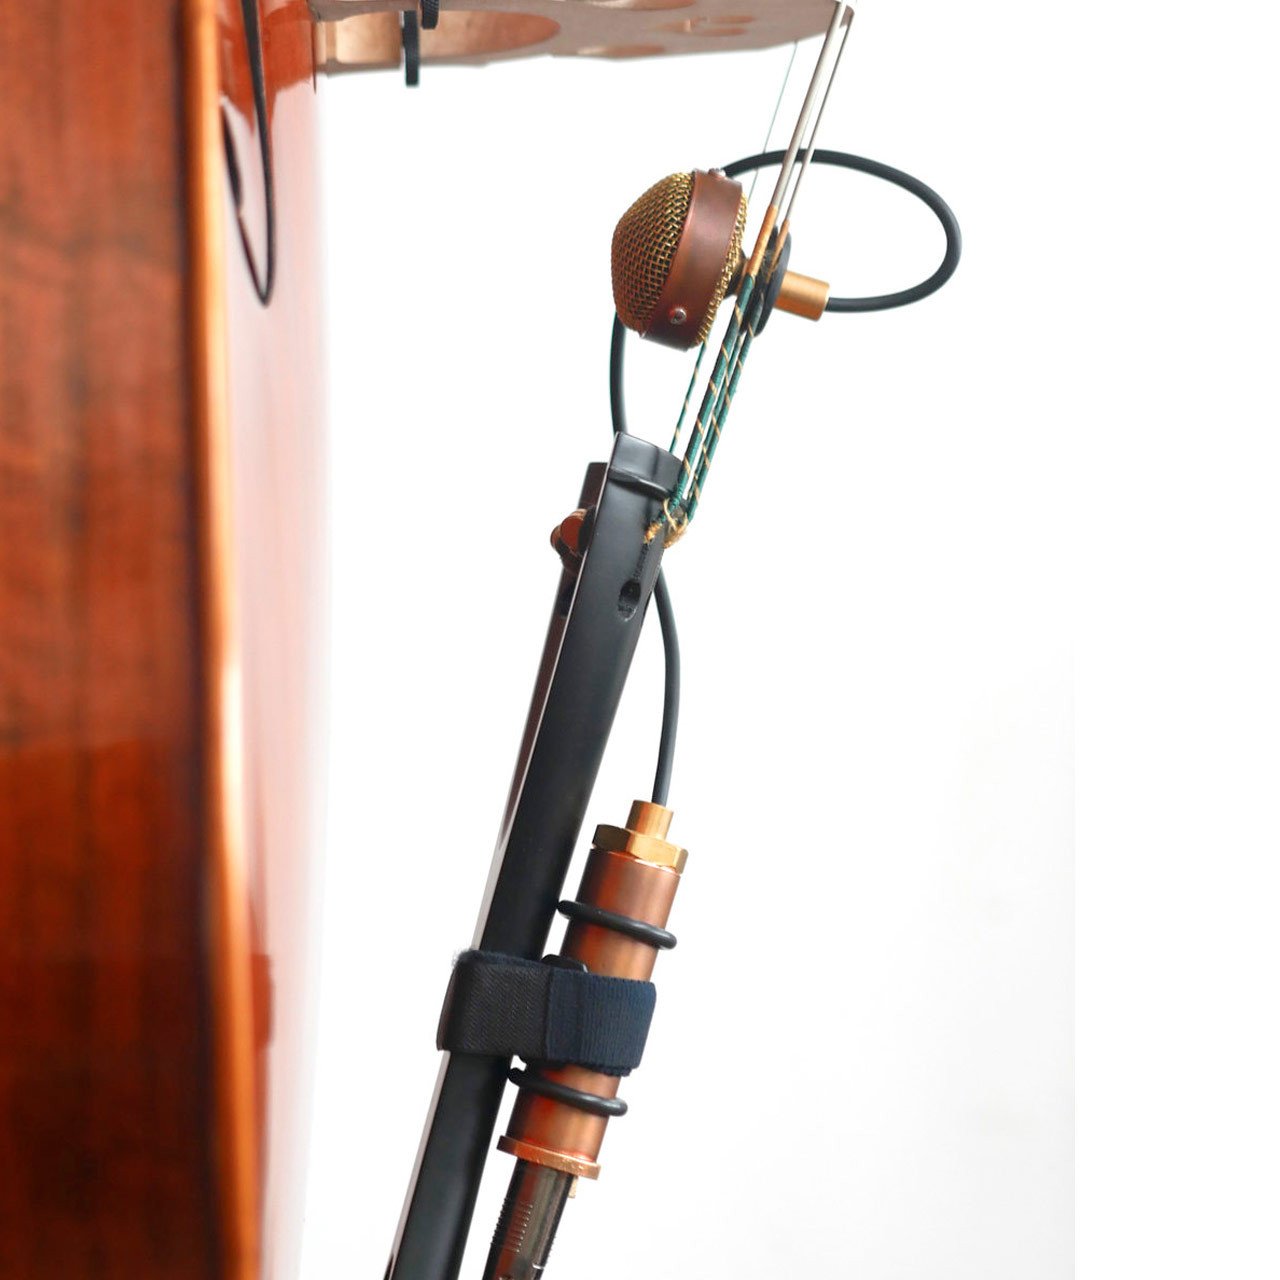 Condenser Microphones - Ear Trumpet Labs Nadine - Condenser Microphone For Upright Bass